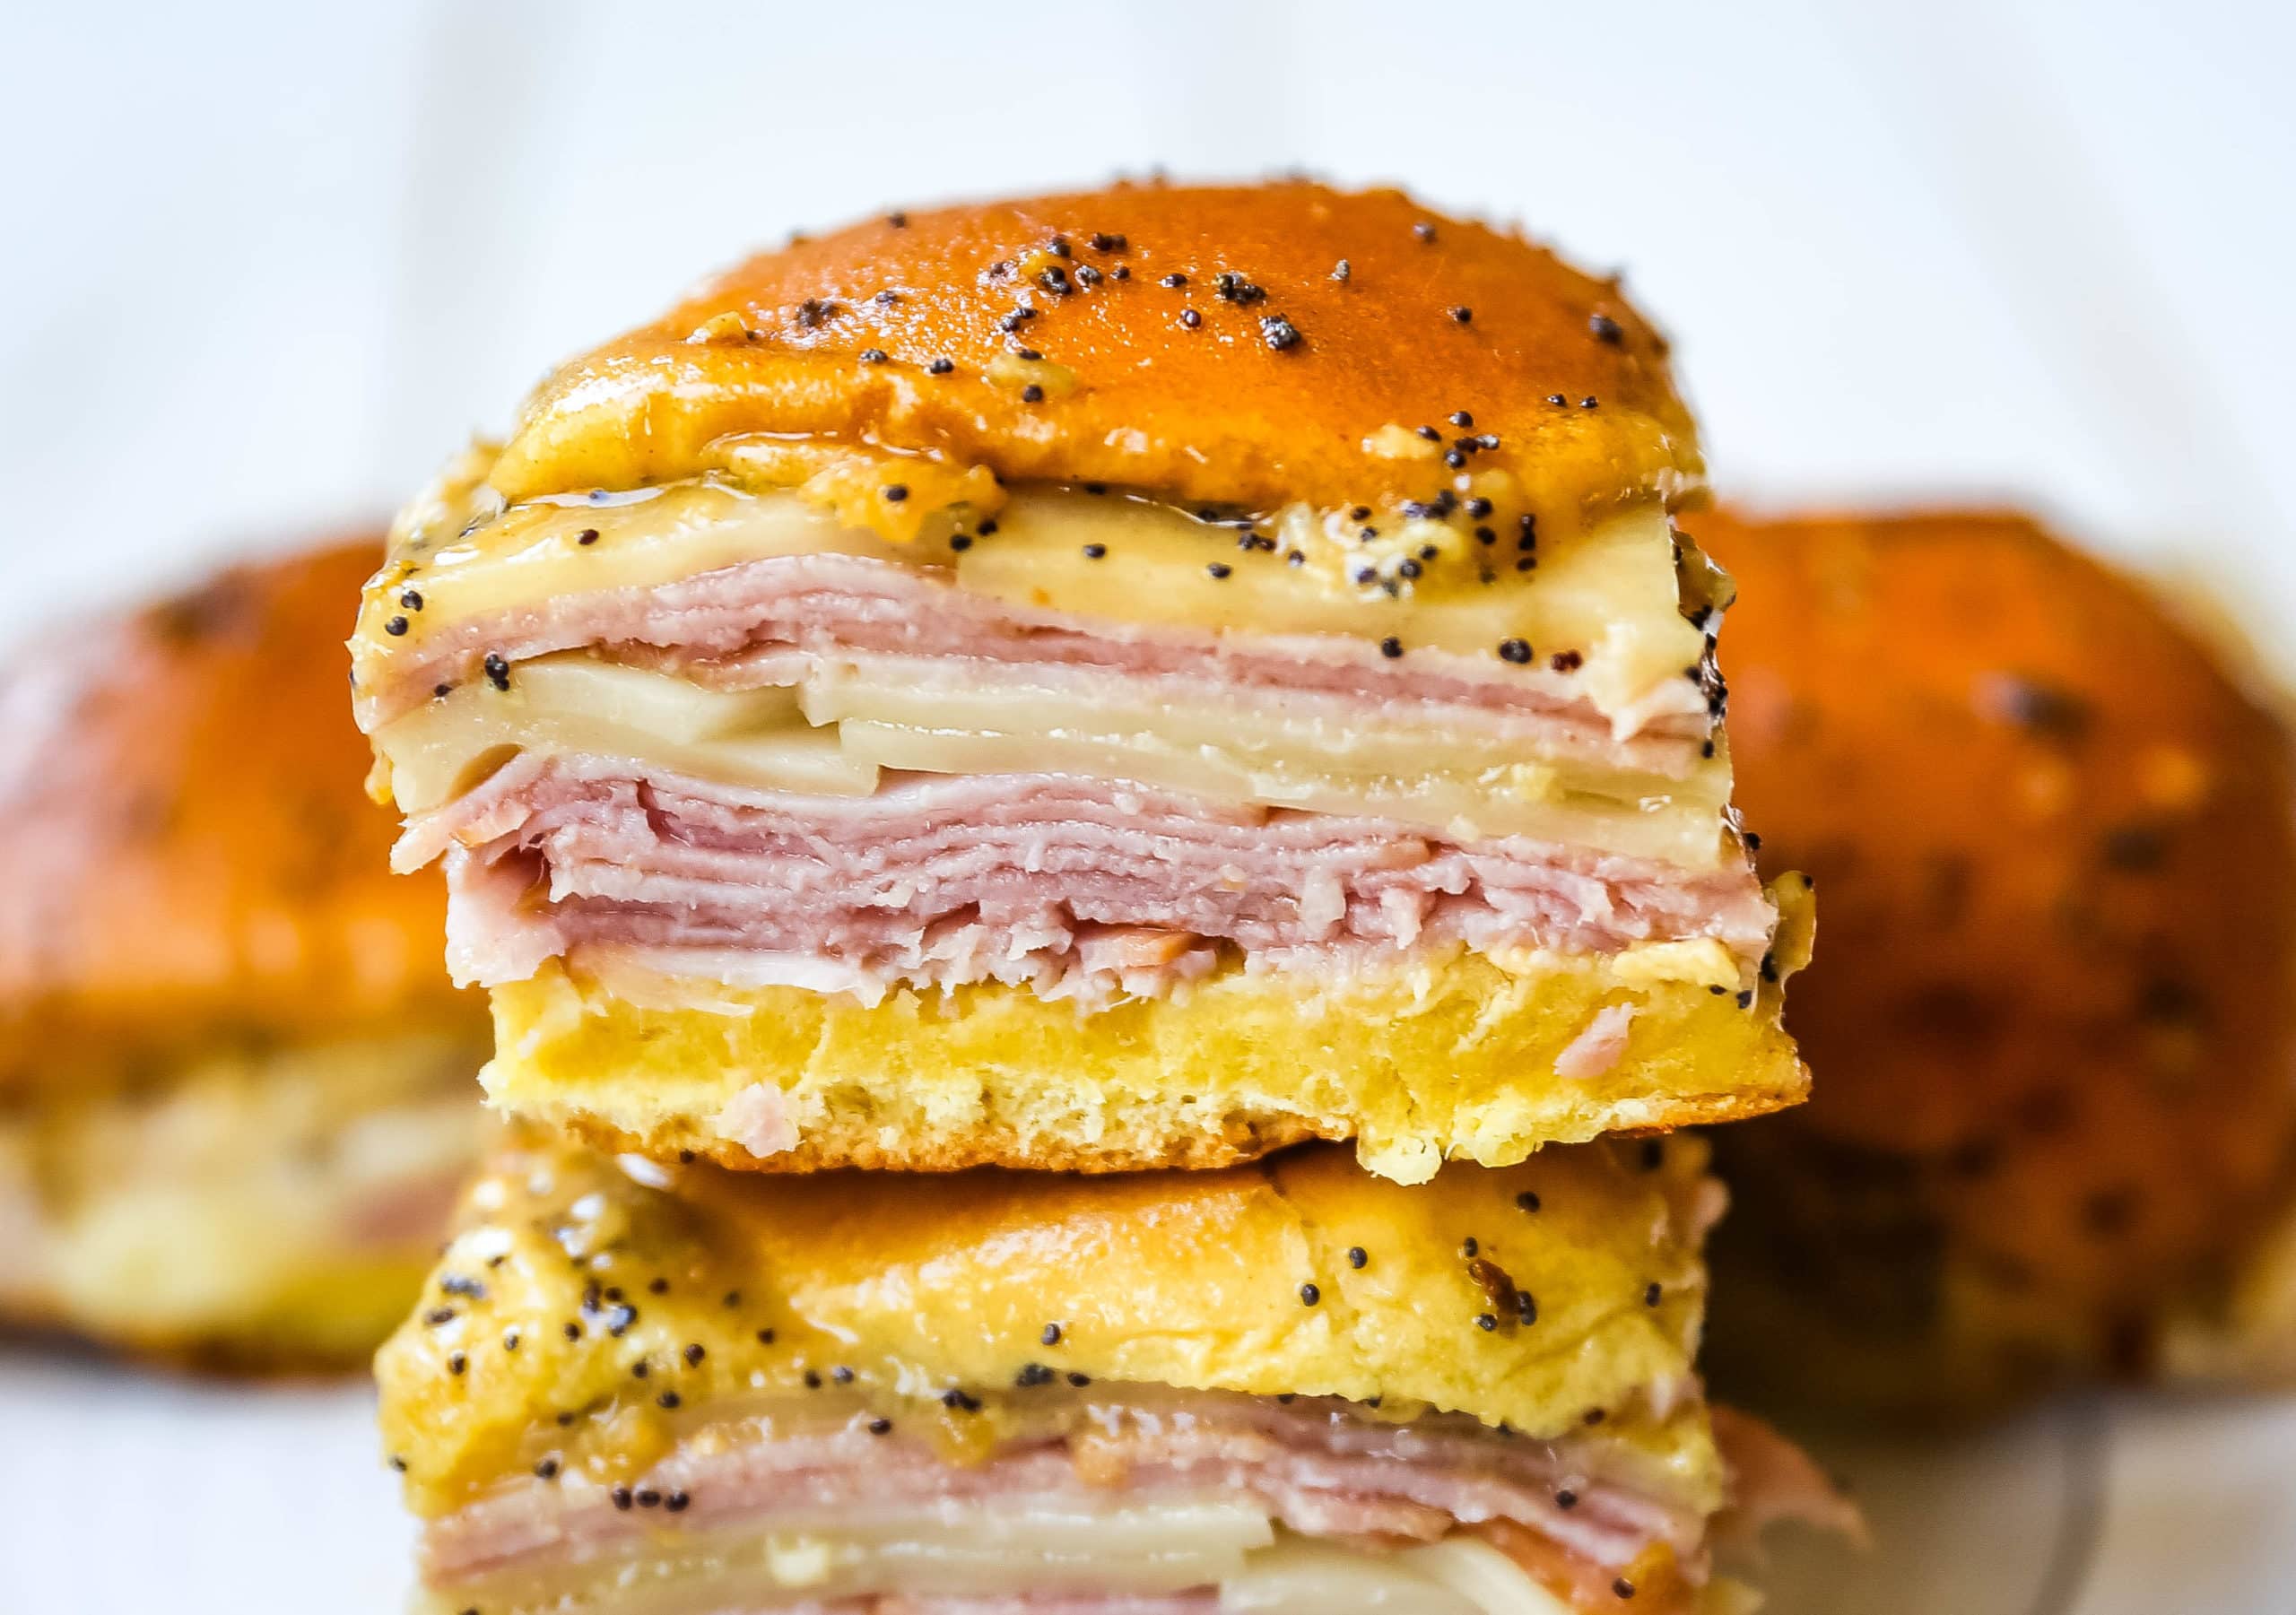 Ham and Cheese Sliders  These baked ham and cheese sliders and layered with ham, melted cheese, on a Hawaiian sweet roll, and basted with a flavorful, buttery sauce. www.modernhoney.com #sandwiches #sliders #hamandcheesesliders